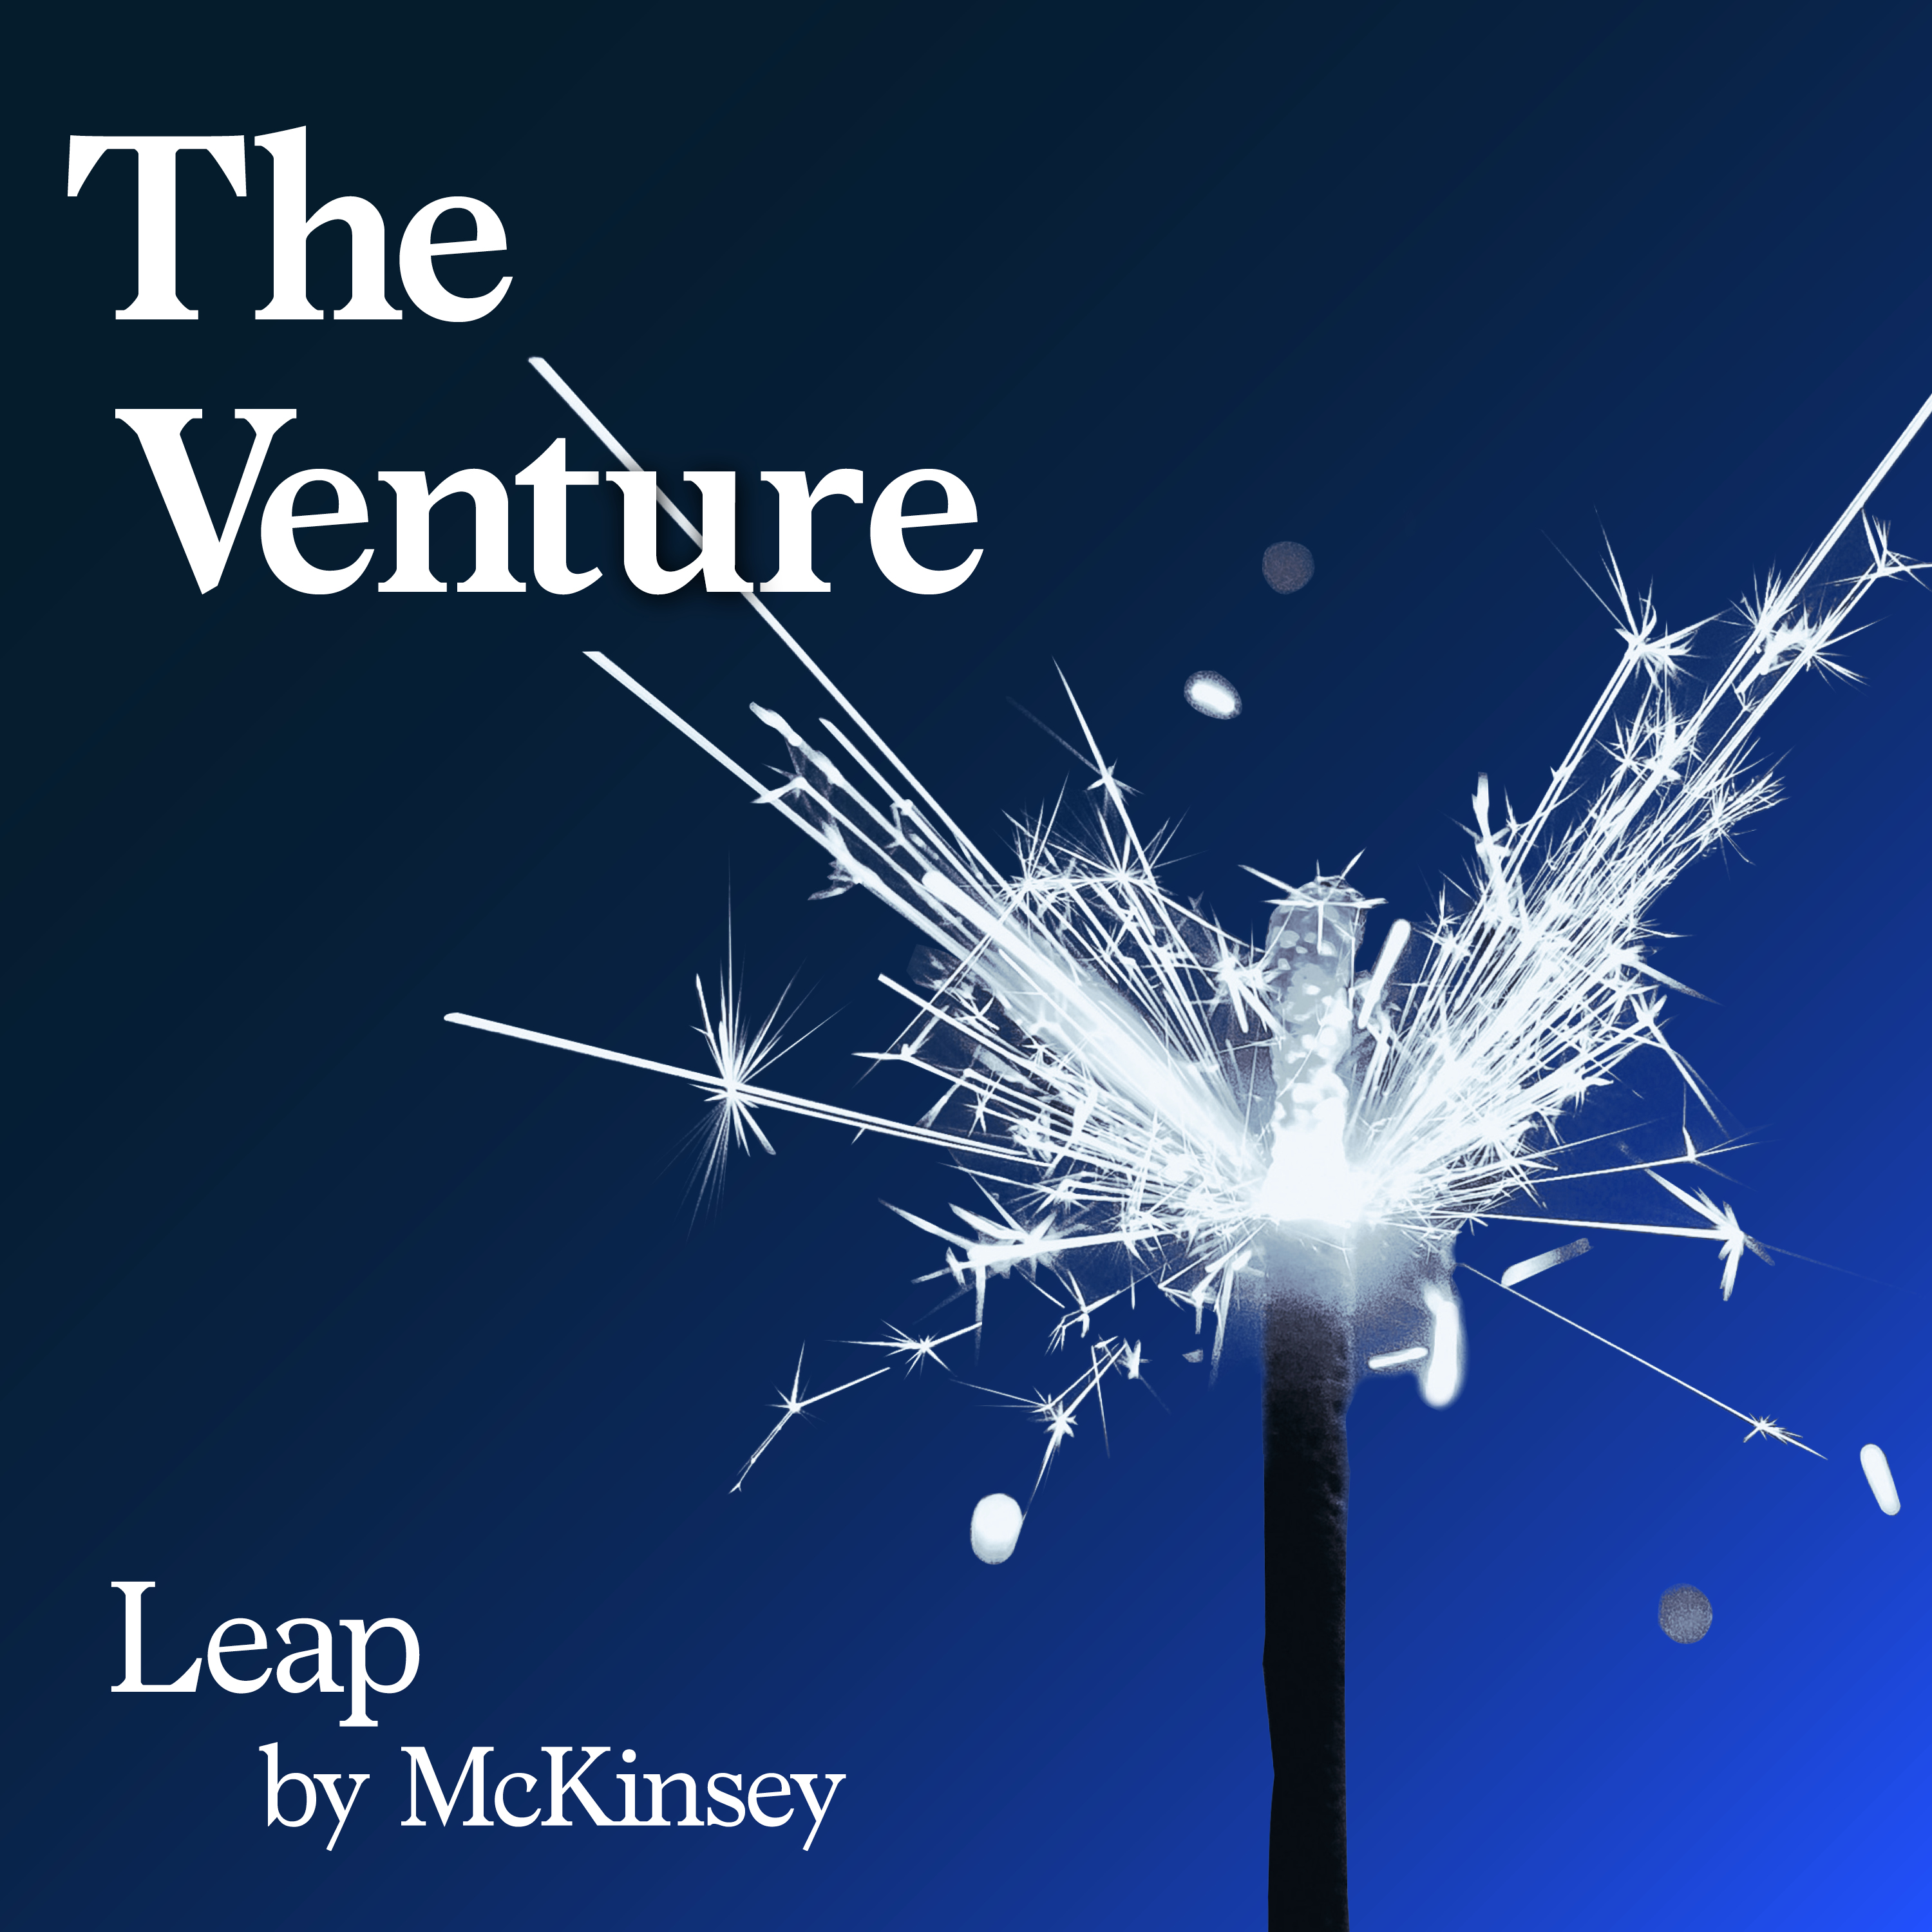 27. Now is the time to create new corporate ventures: A conversation with McKinsey’s Paul Jenkins